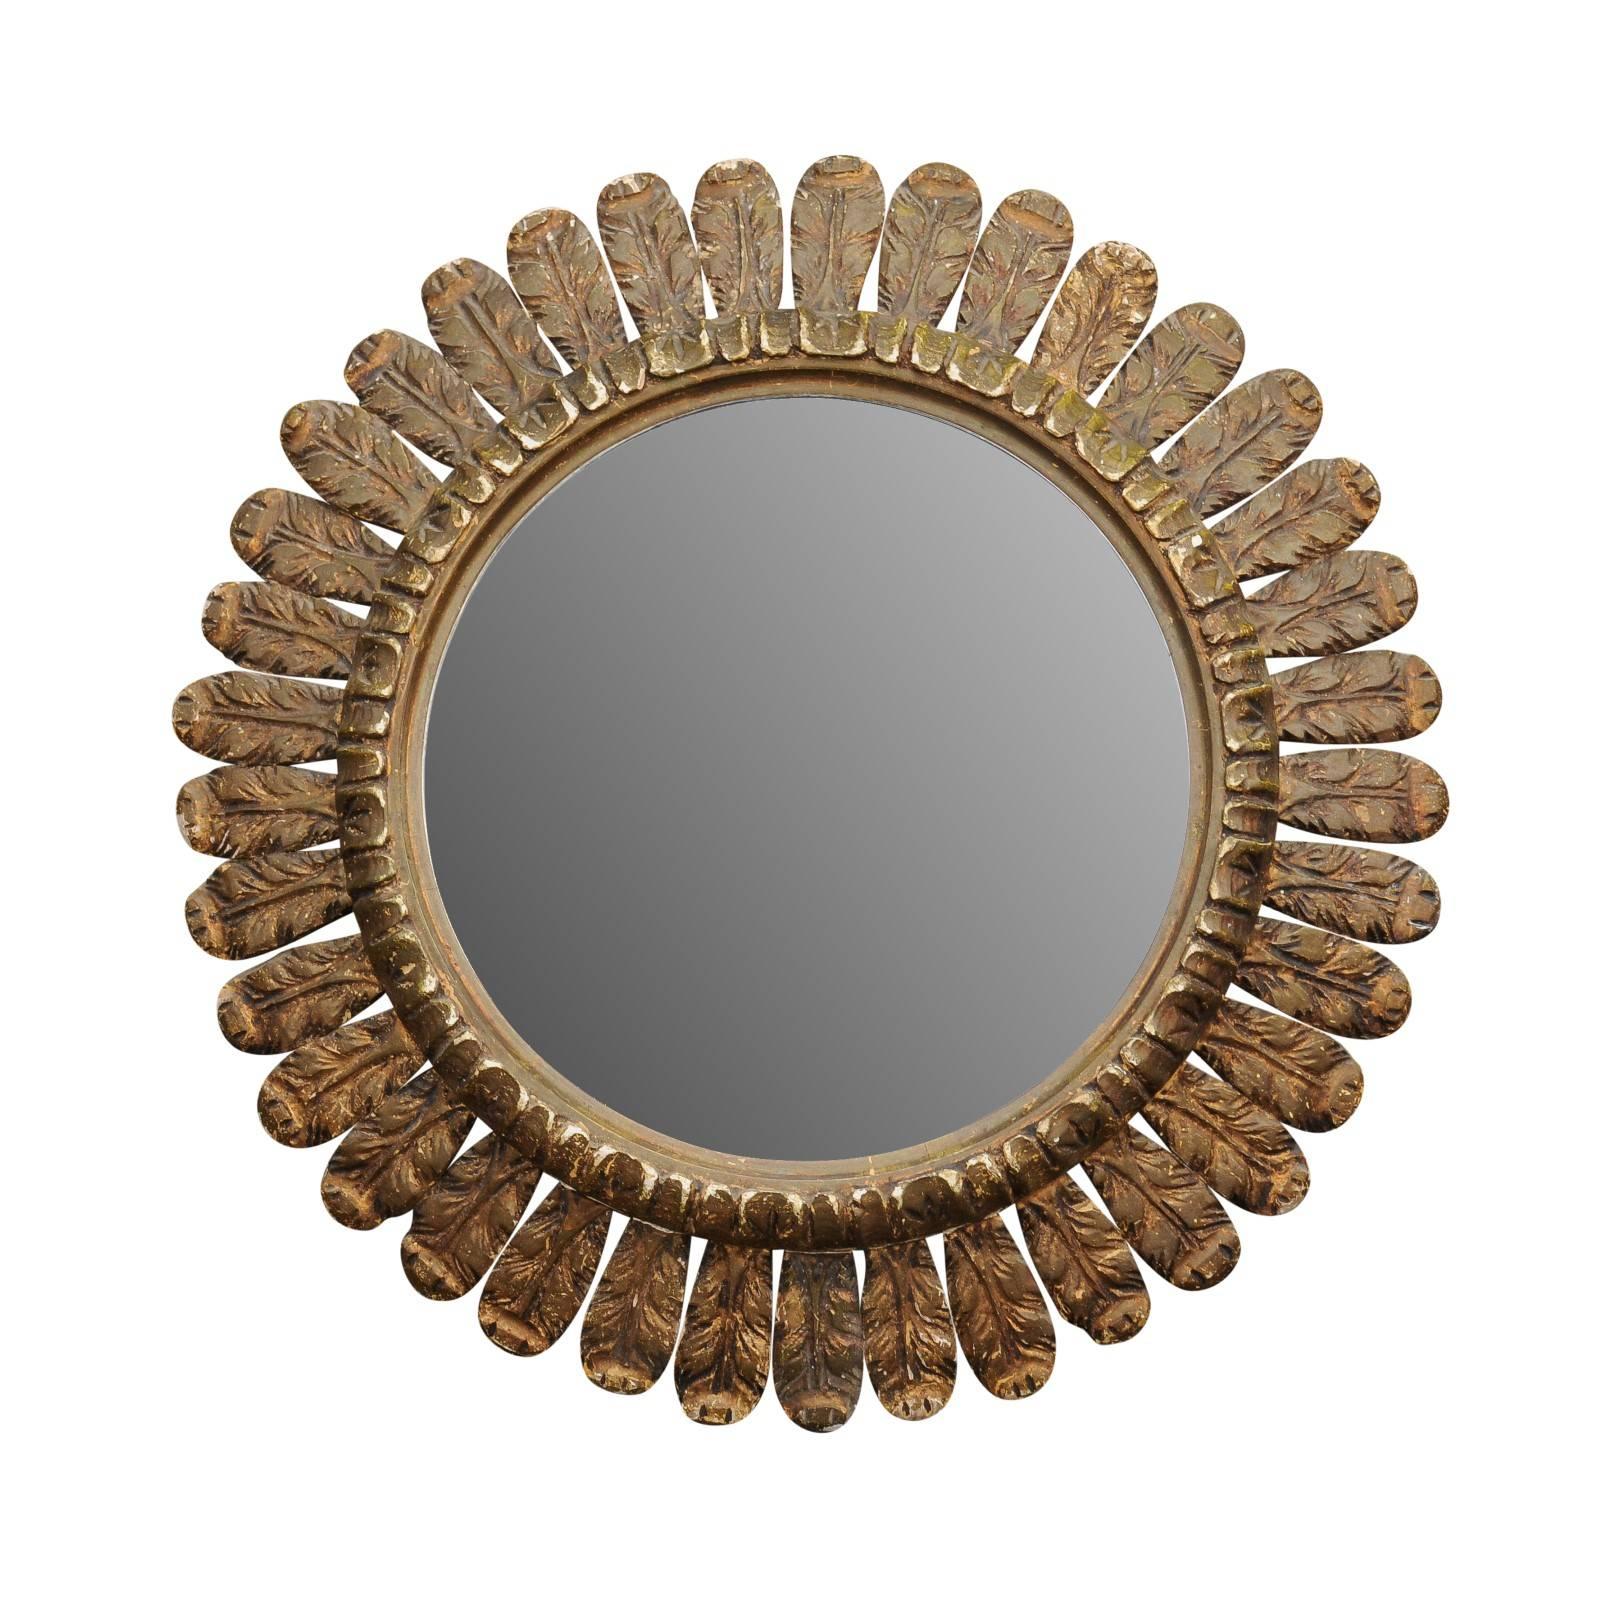 Italian Carved Giltwood Circular Mirror with Foliage Motifs from the 1950s